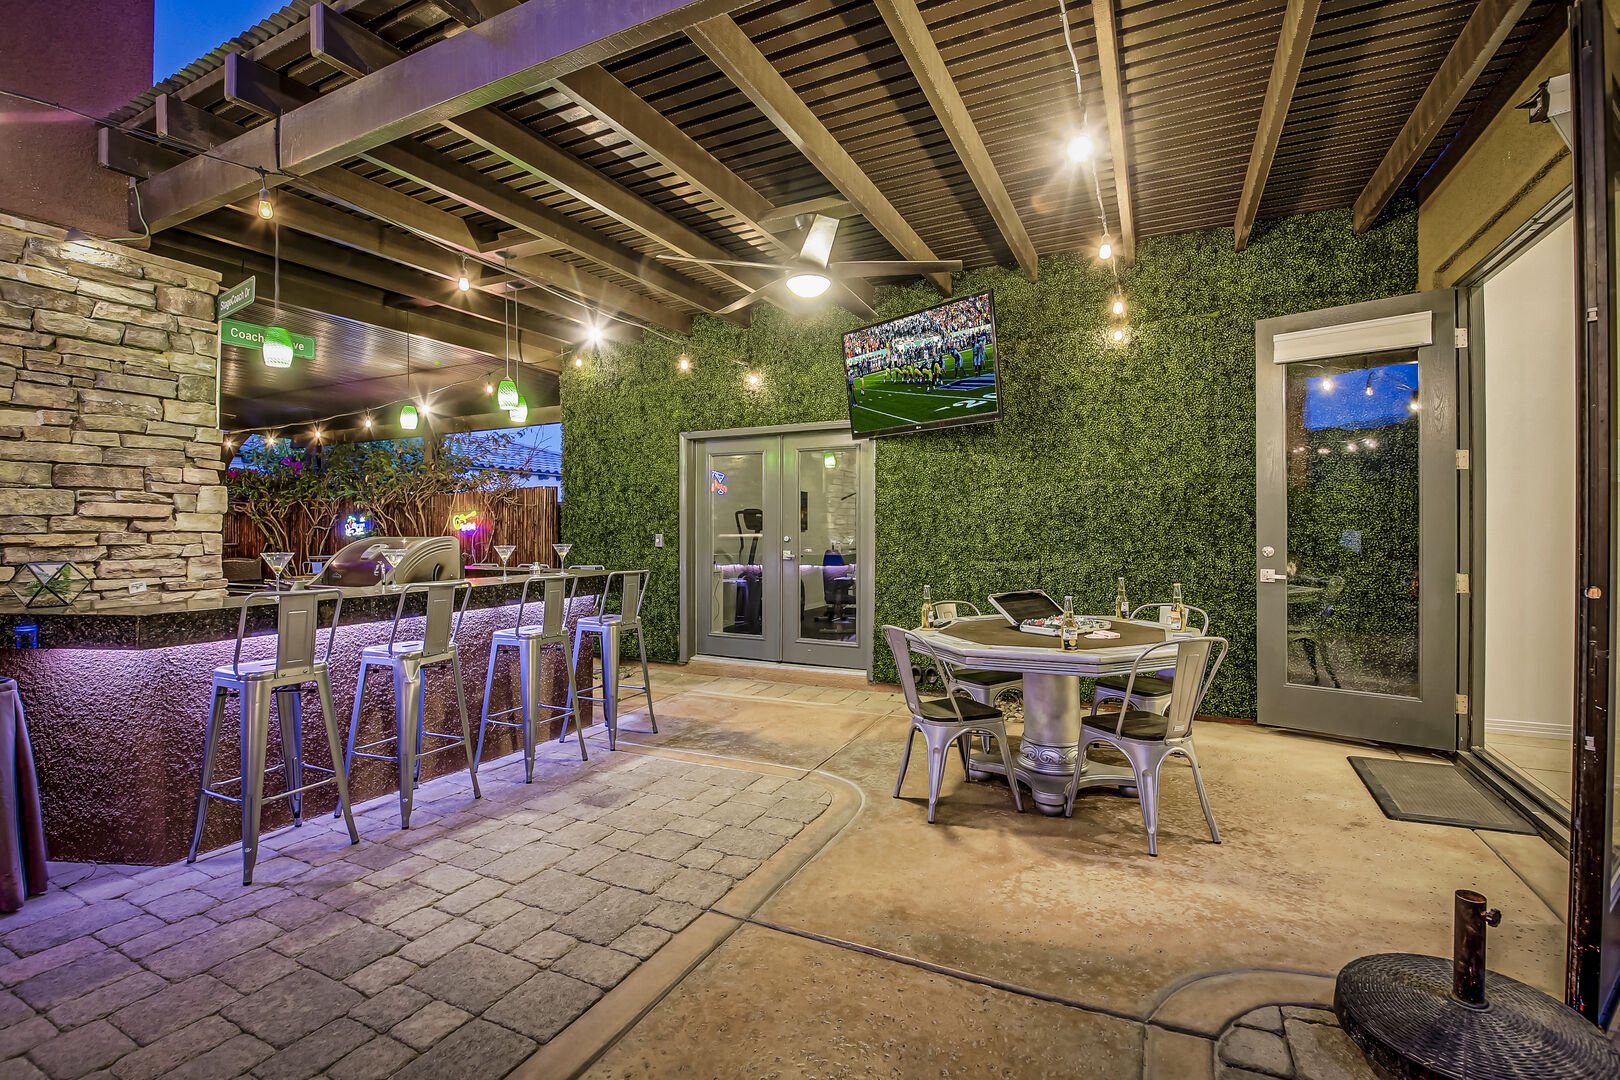 Hang out near the custom built in bar, watch a game on the outdoor TV or play a little game of poker, there is so much to do under the covered patio.